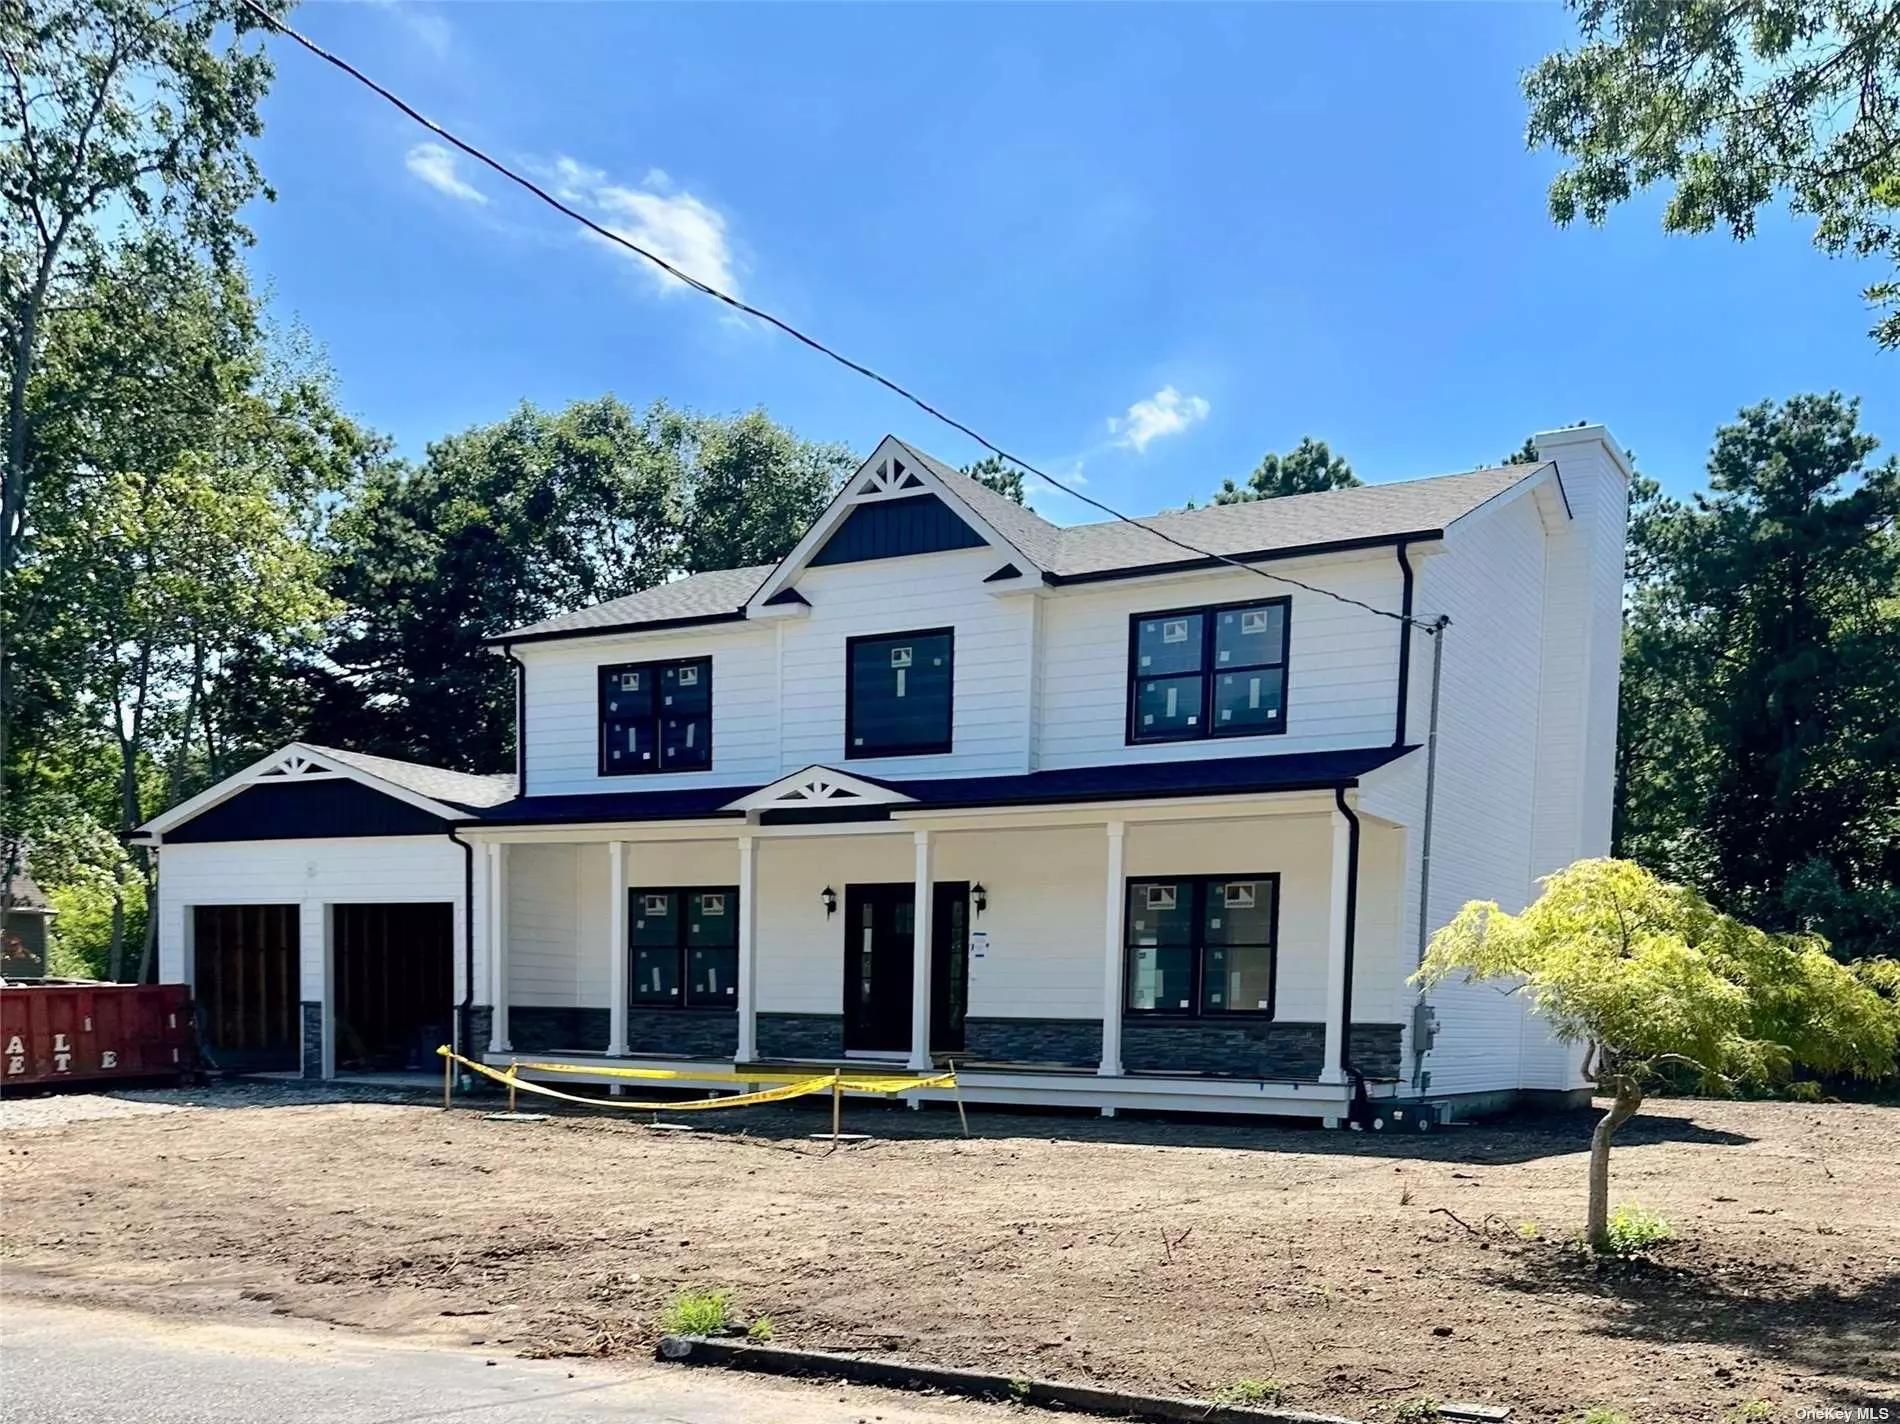 New Construction! Full Front Porch Colonial! Now is the time for you to customize the interior. Select your dream kitchen and trim package. Oversized lot 250 x 100. Possible subdivision with Pine Barren&rsquo;s credit for a future investment or just enjoy the oversized lot all for yourself.